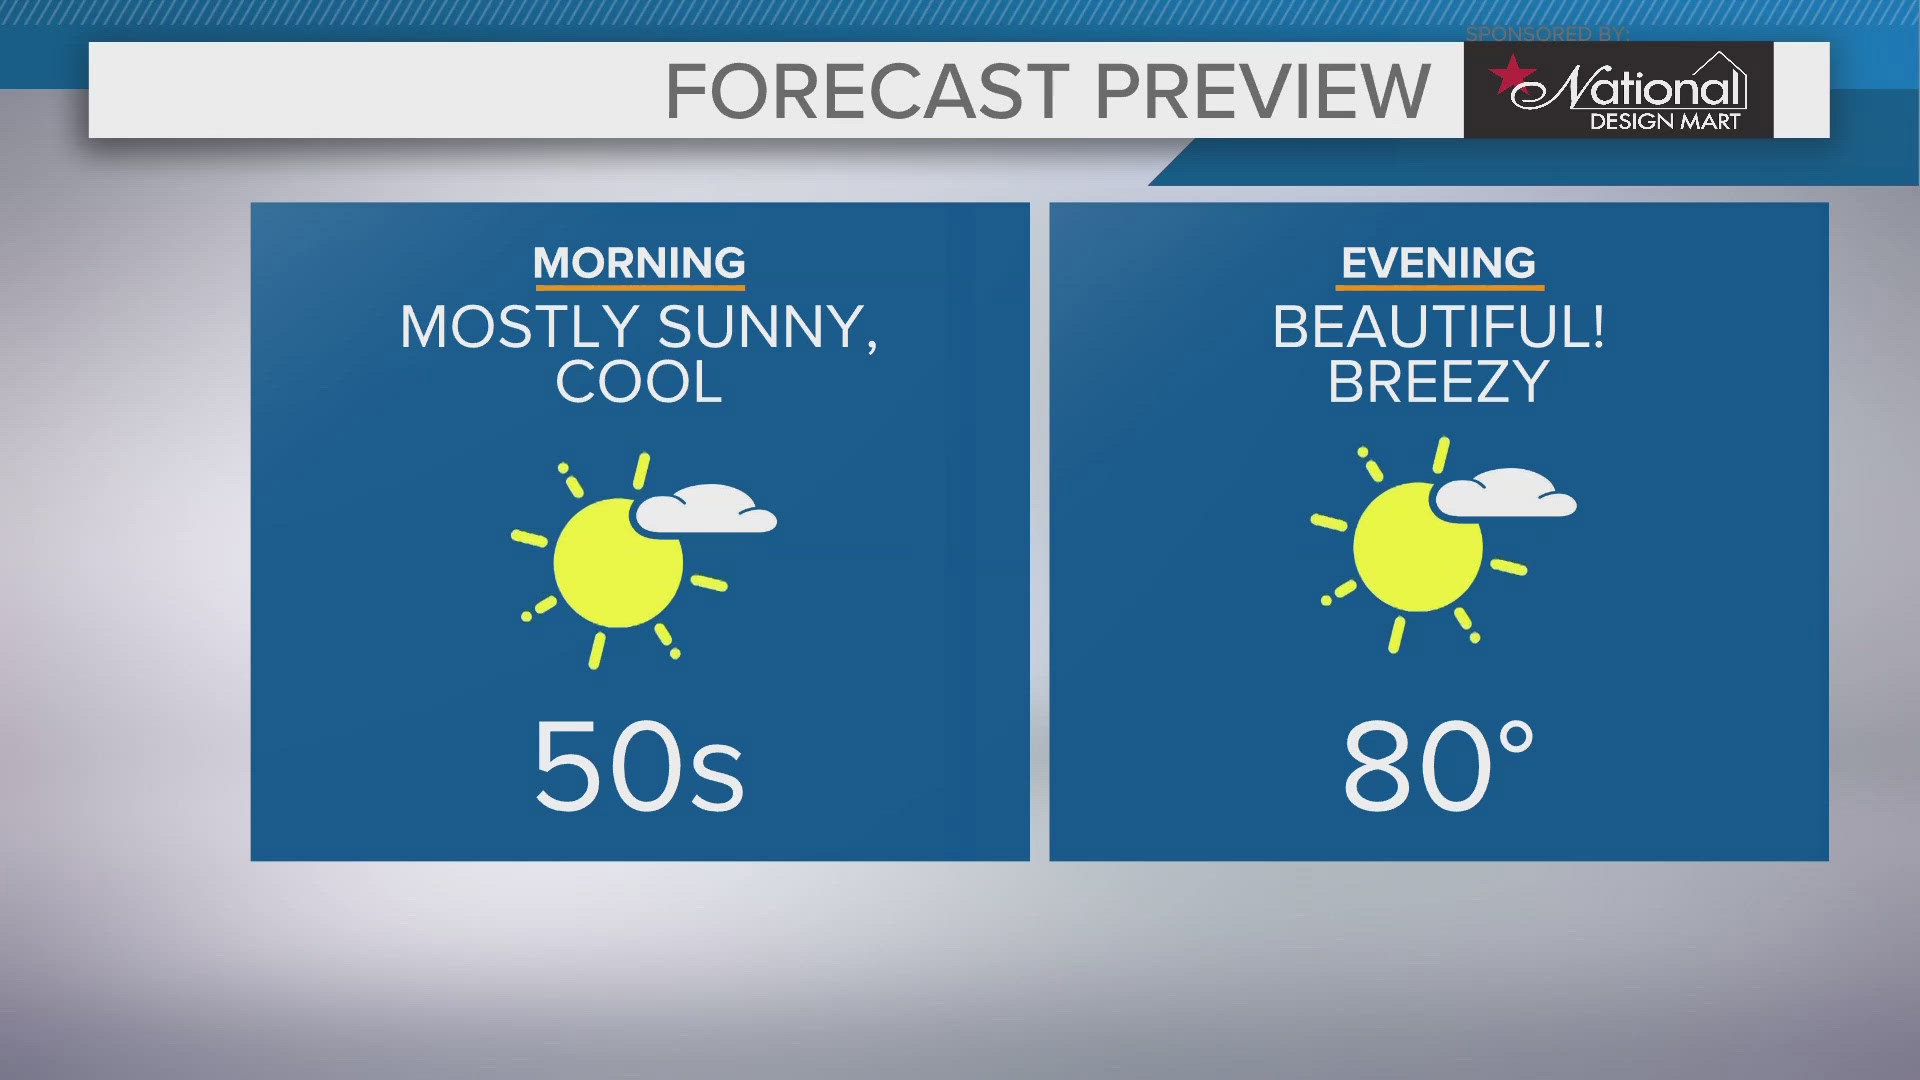 After a seasonally cool start tomorrow morning, it will feel like summer again by the afternoon. Happy May 1!